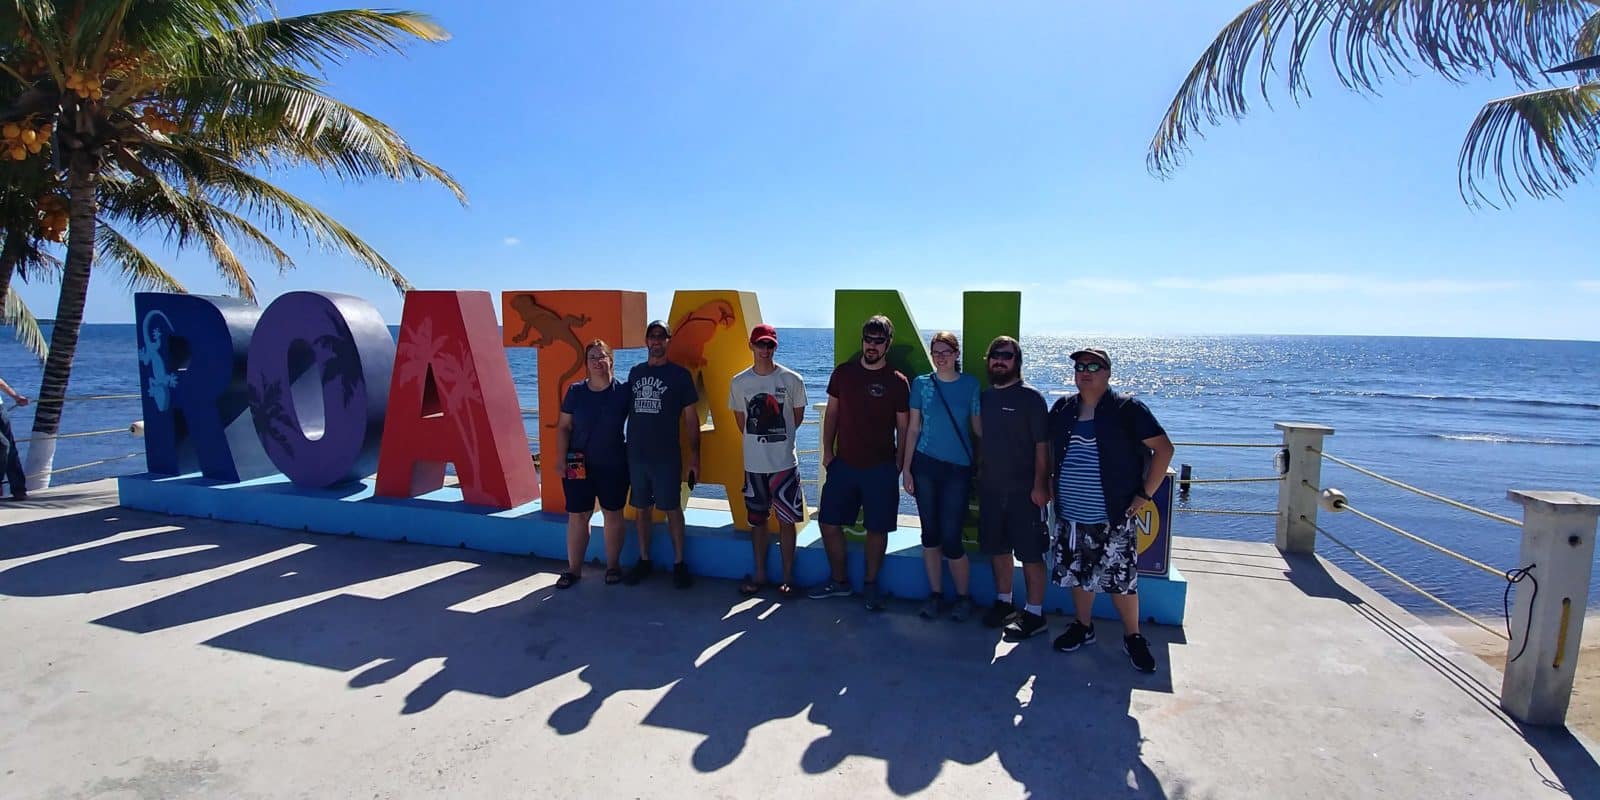 Group stands in front of Roatan sign adventures monkeys sloths snorkeling